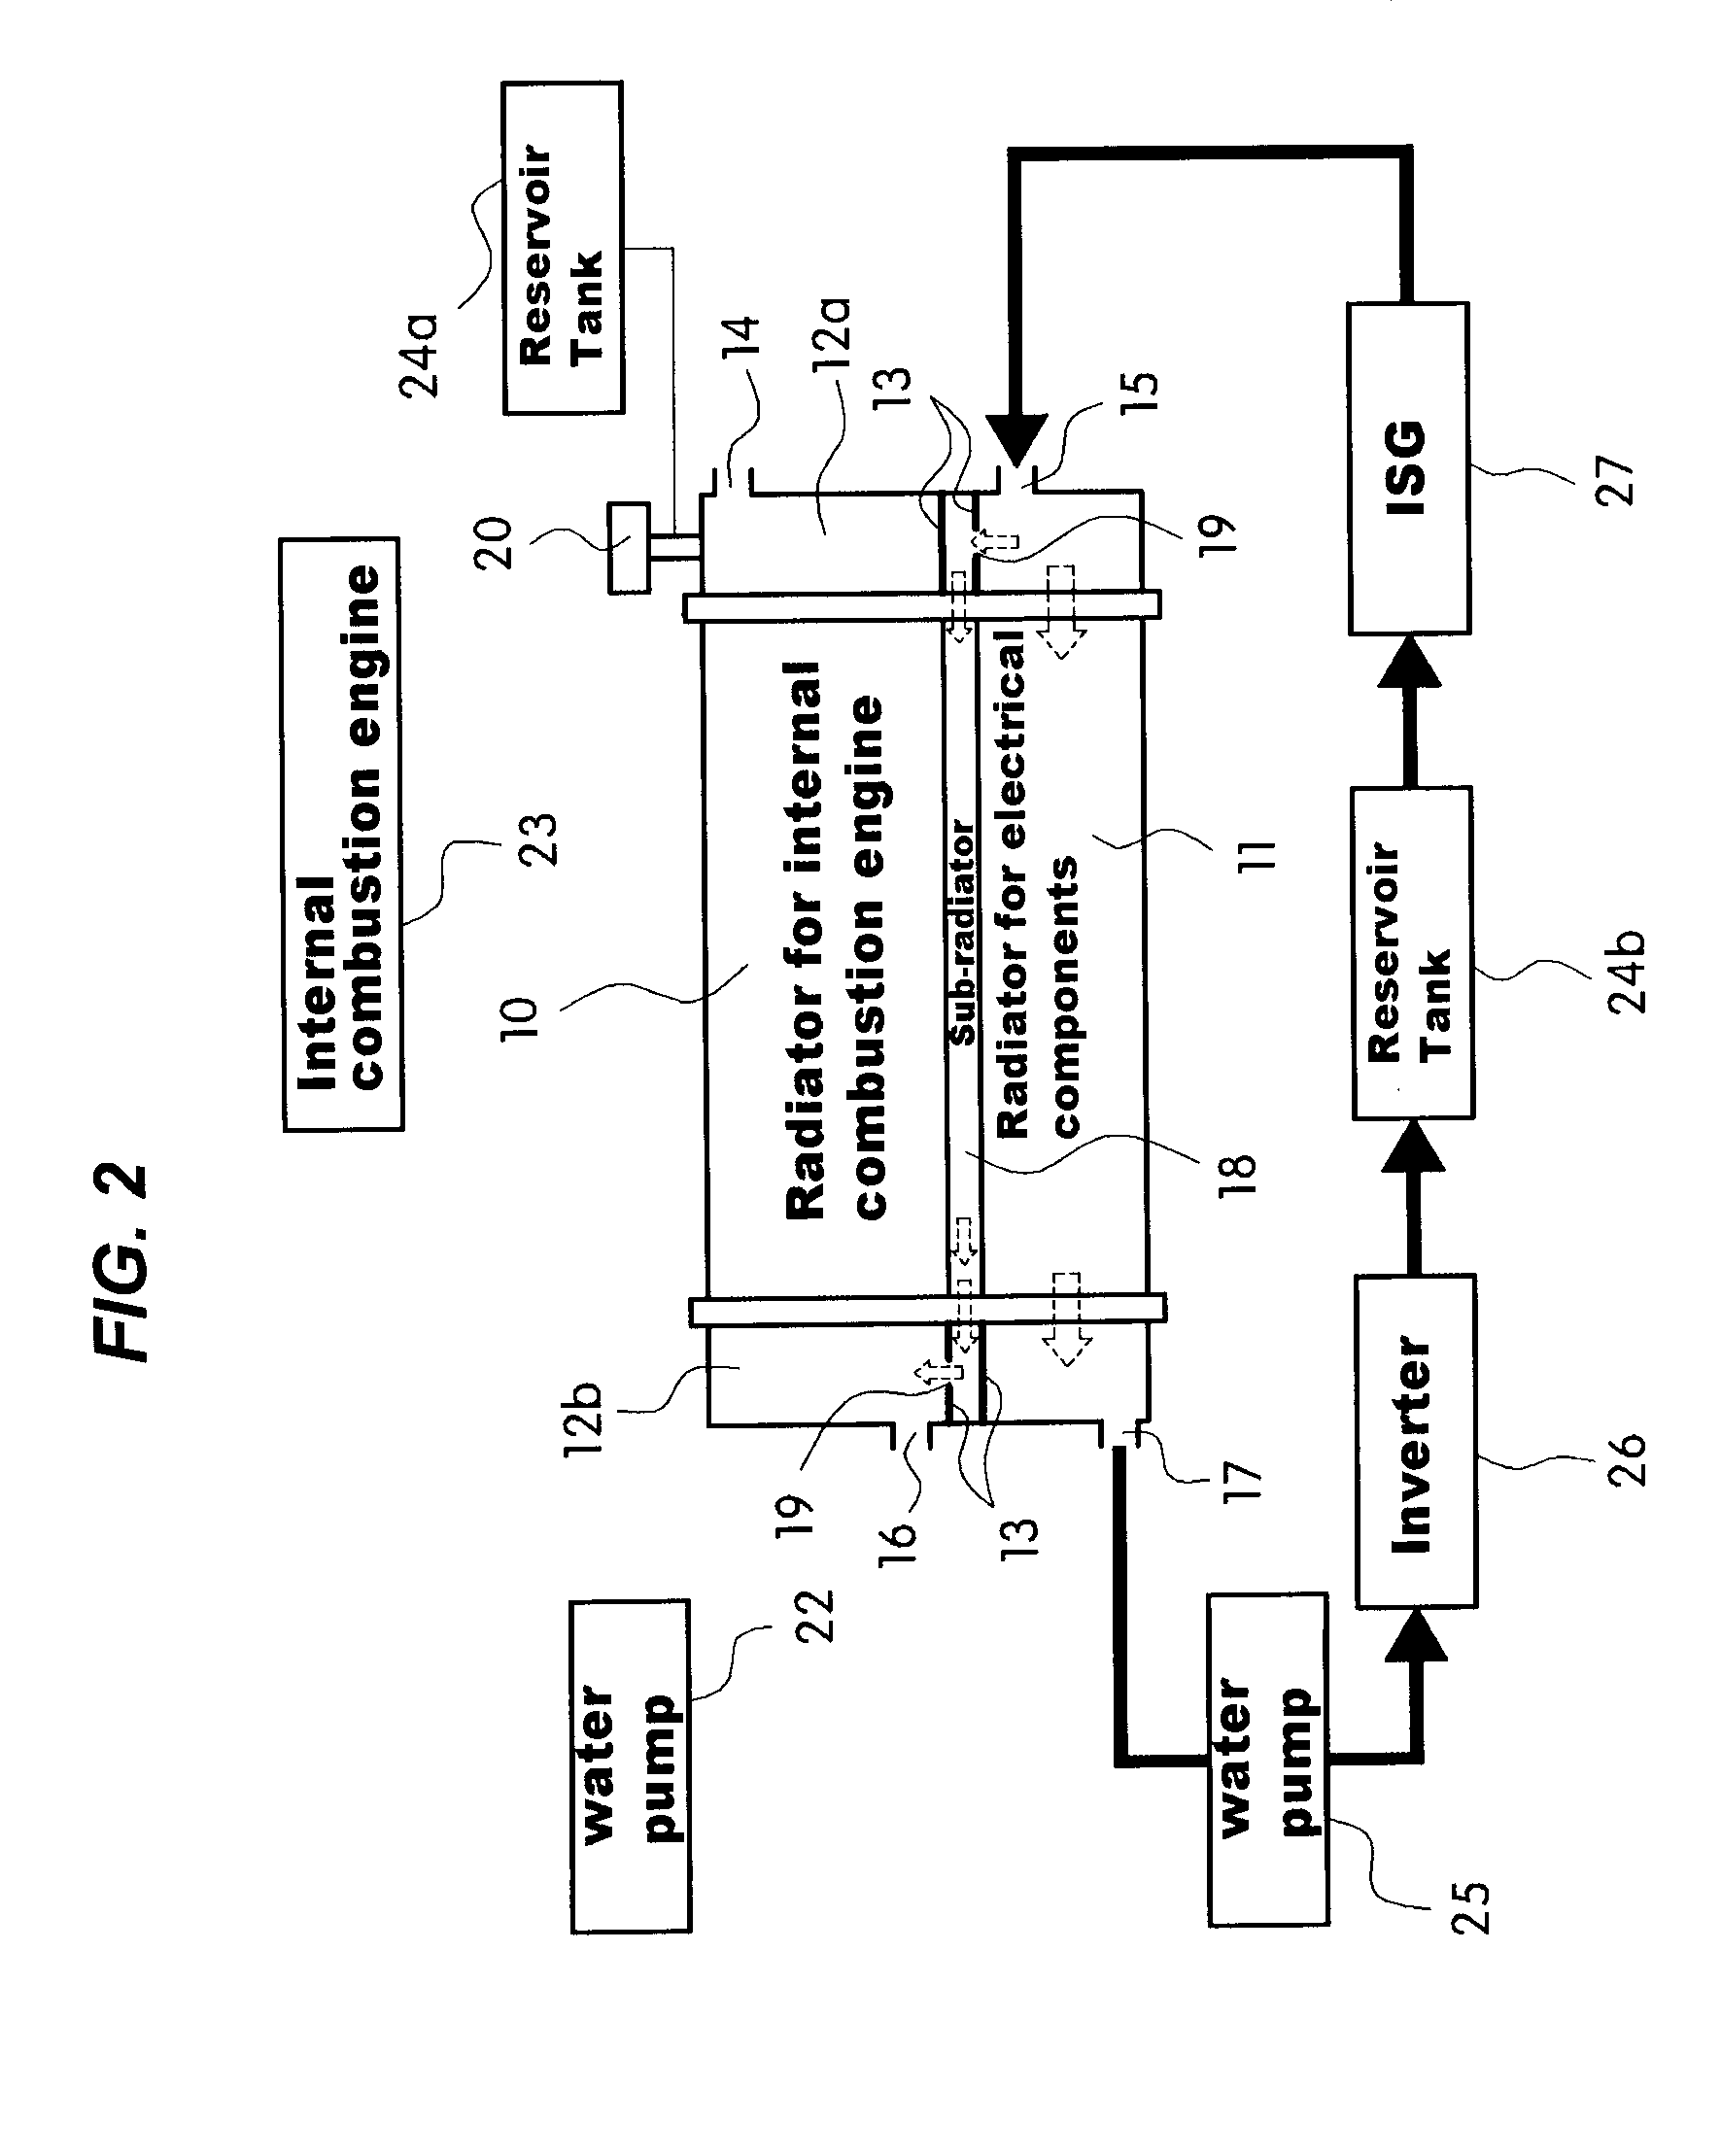 Integrated hybrid heat exchanger with multi-sectional structure